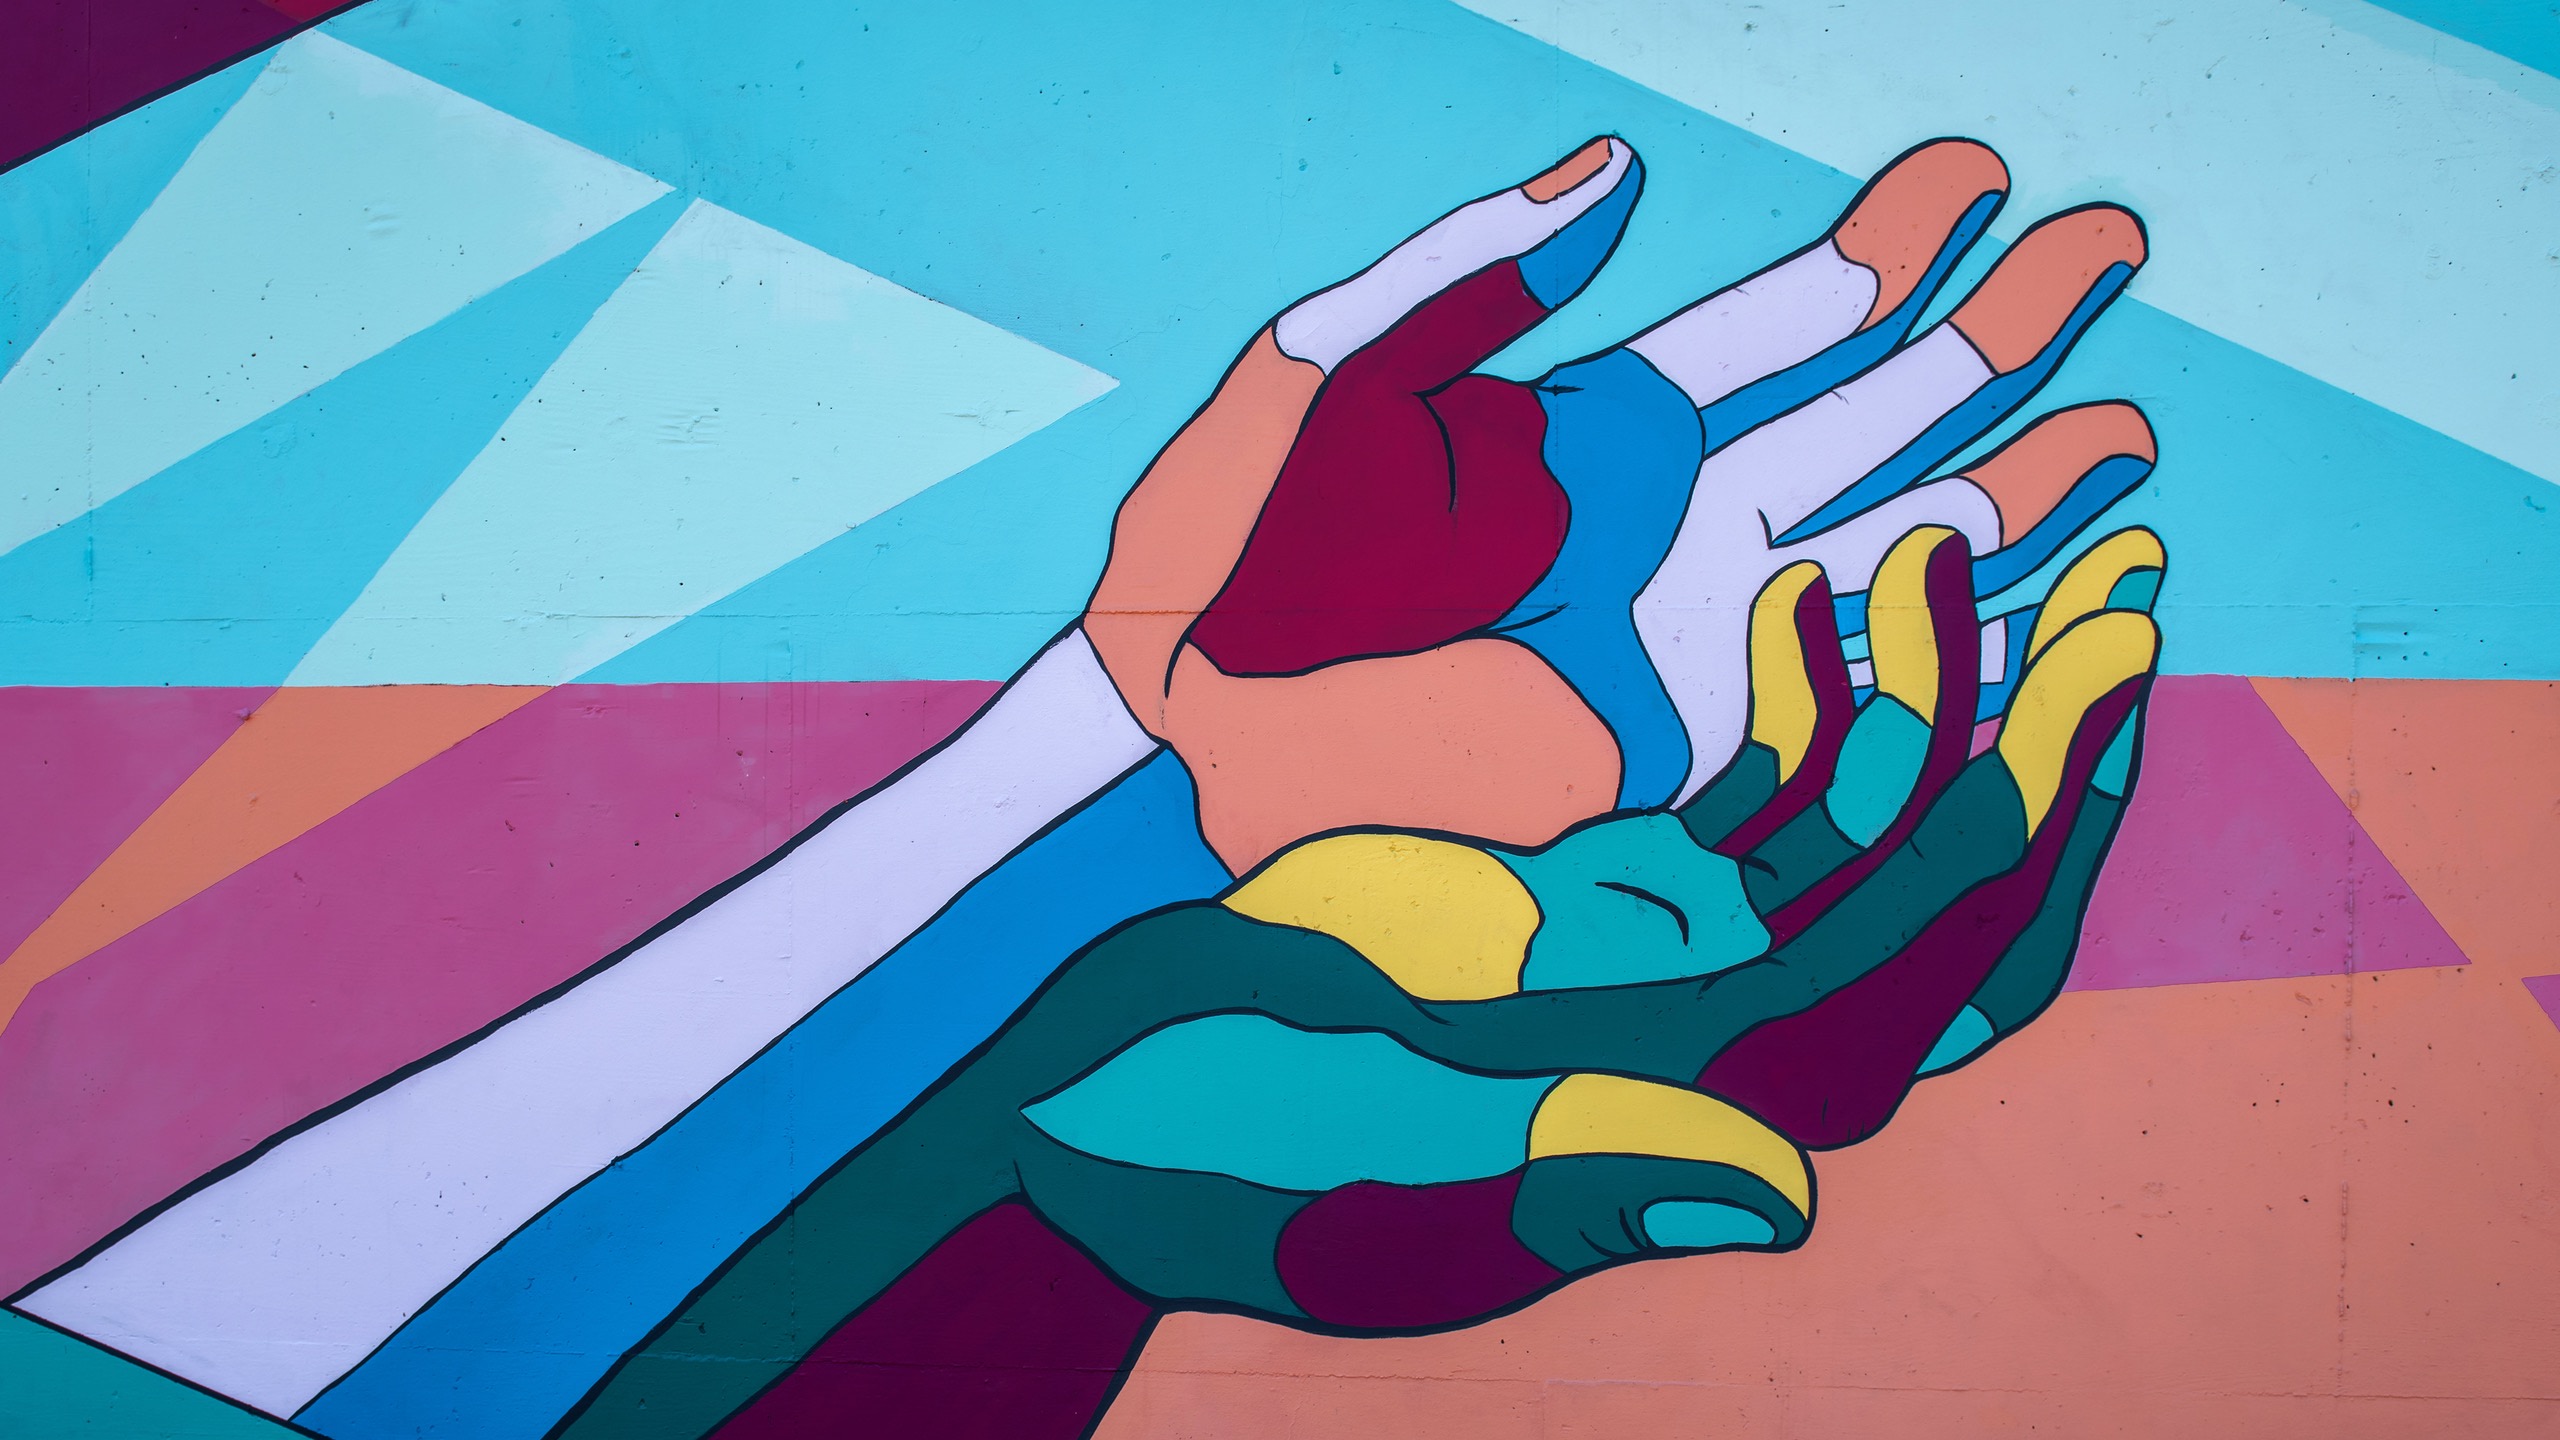 Artwork of two multicoloured hands reaching upwards